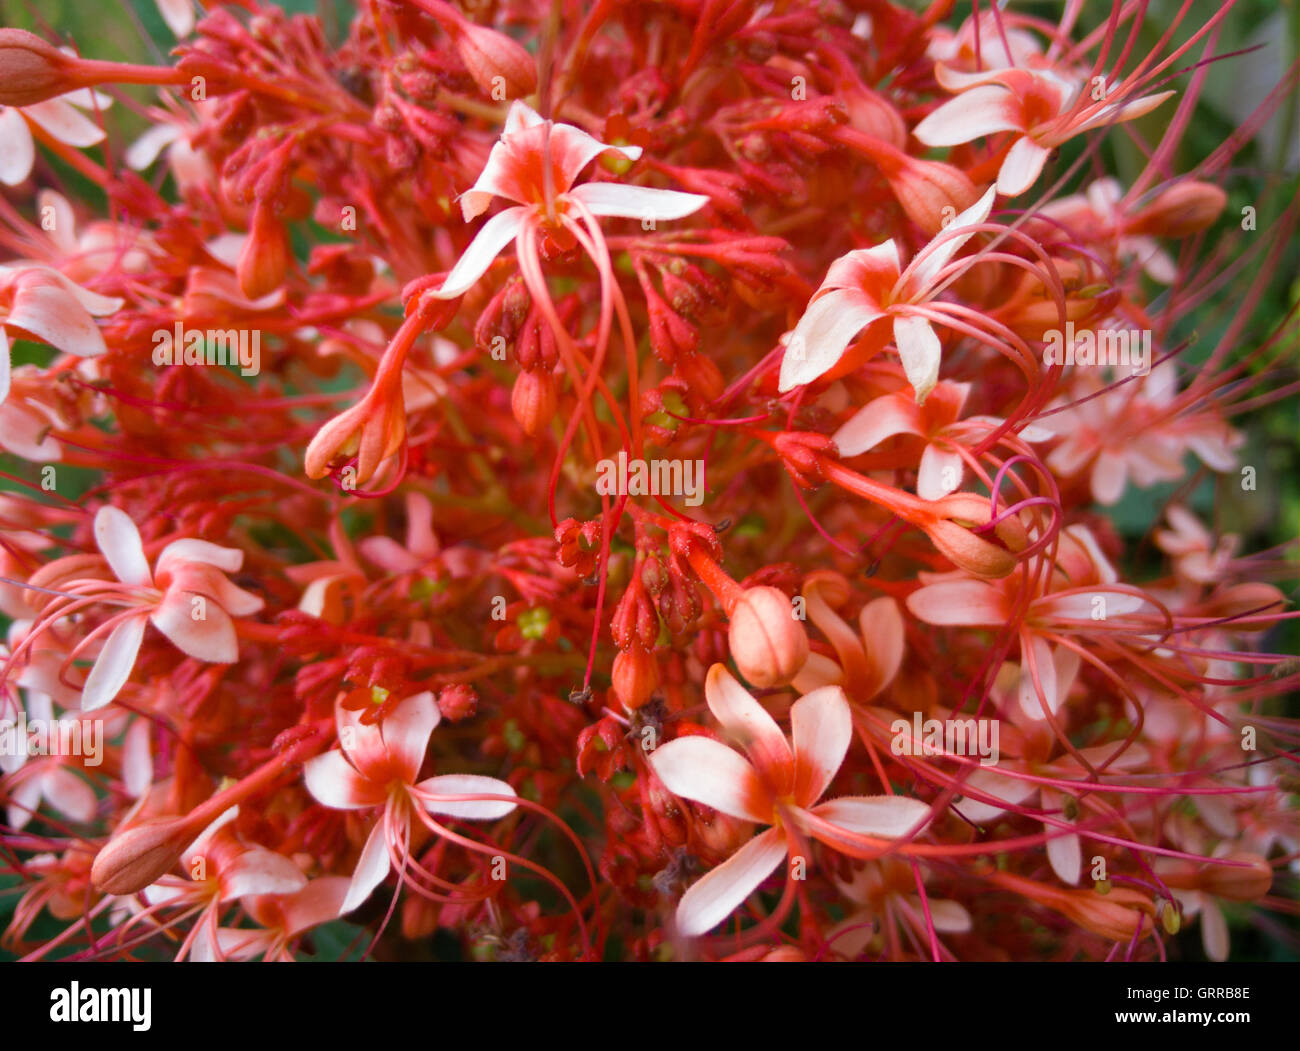 red ixora pavetta flowers in canning hill, Thailand Stock Photo